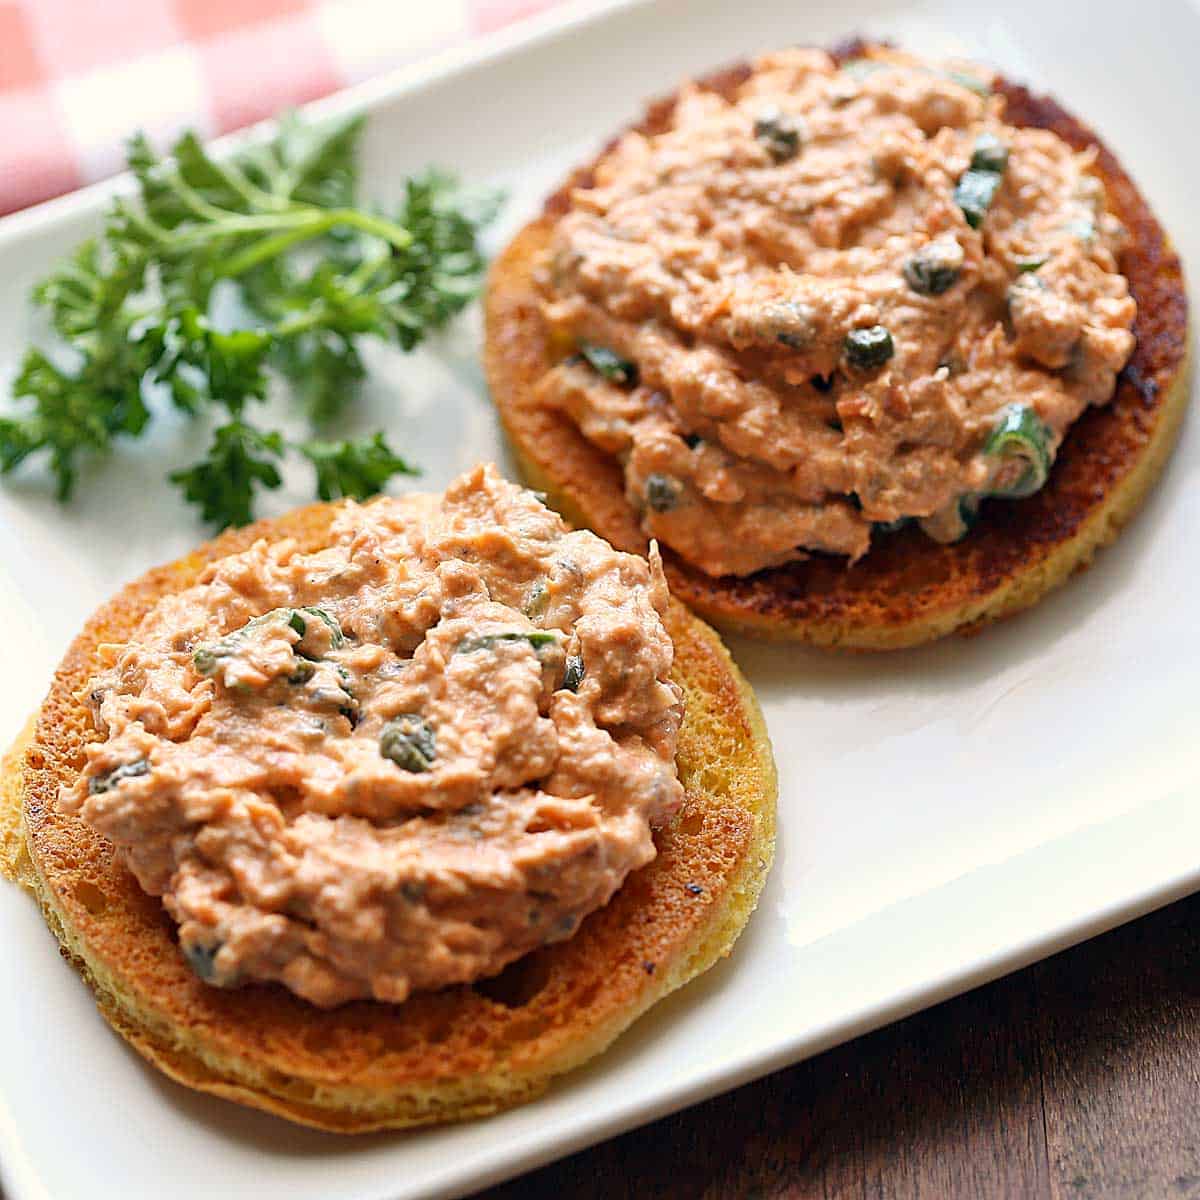 Low Sodium Canned Salmon